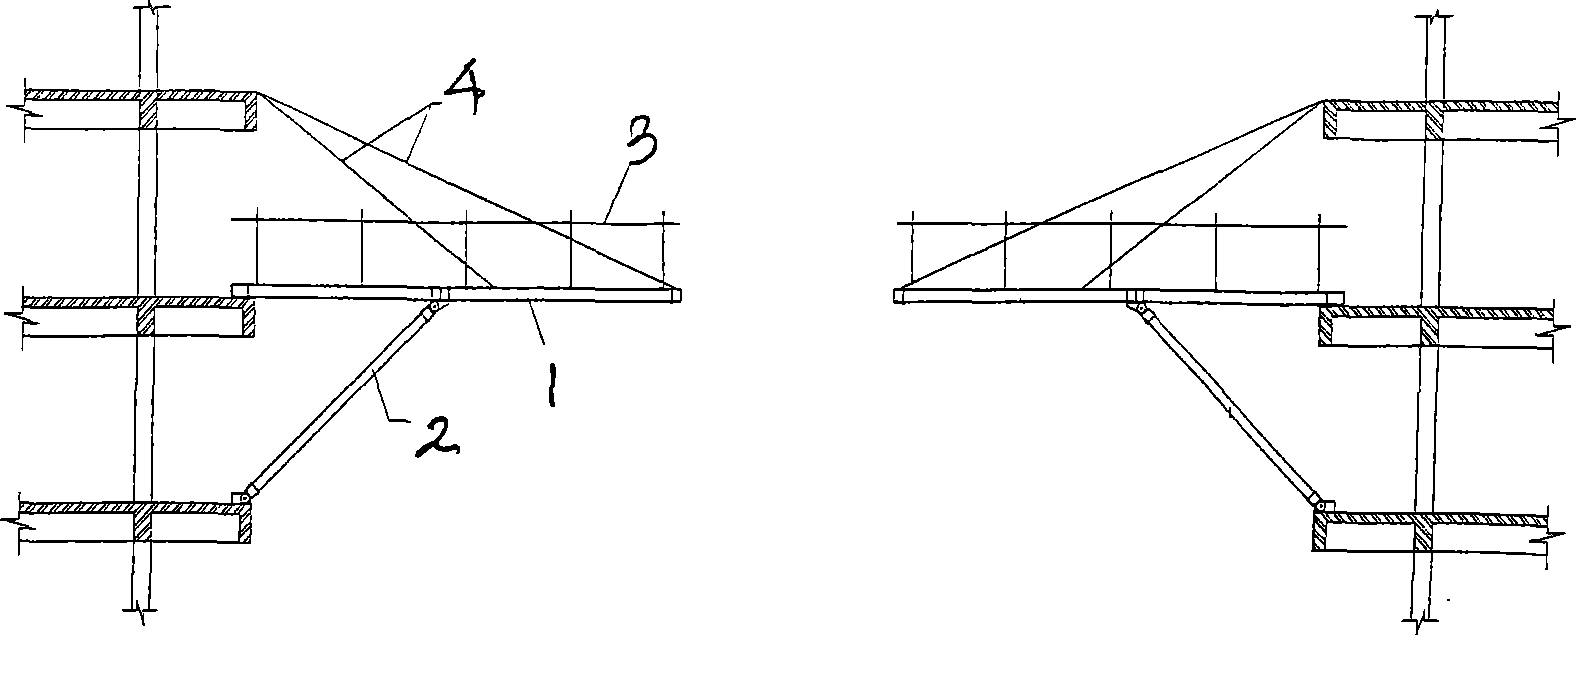 Construction method for spacing suspension cable structural template support platform